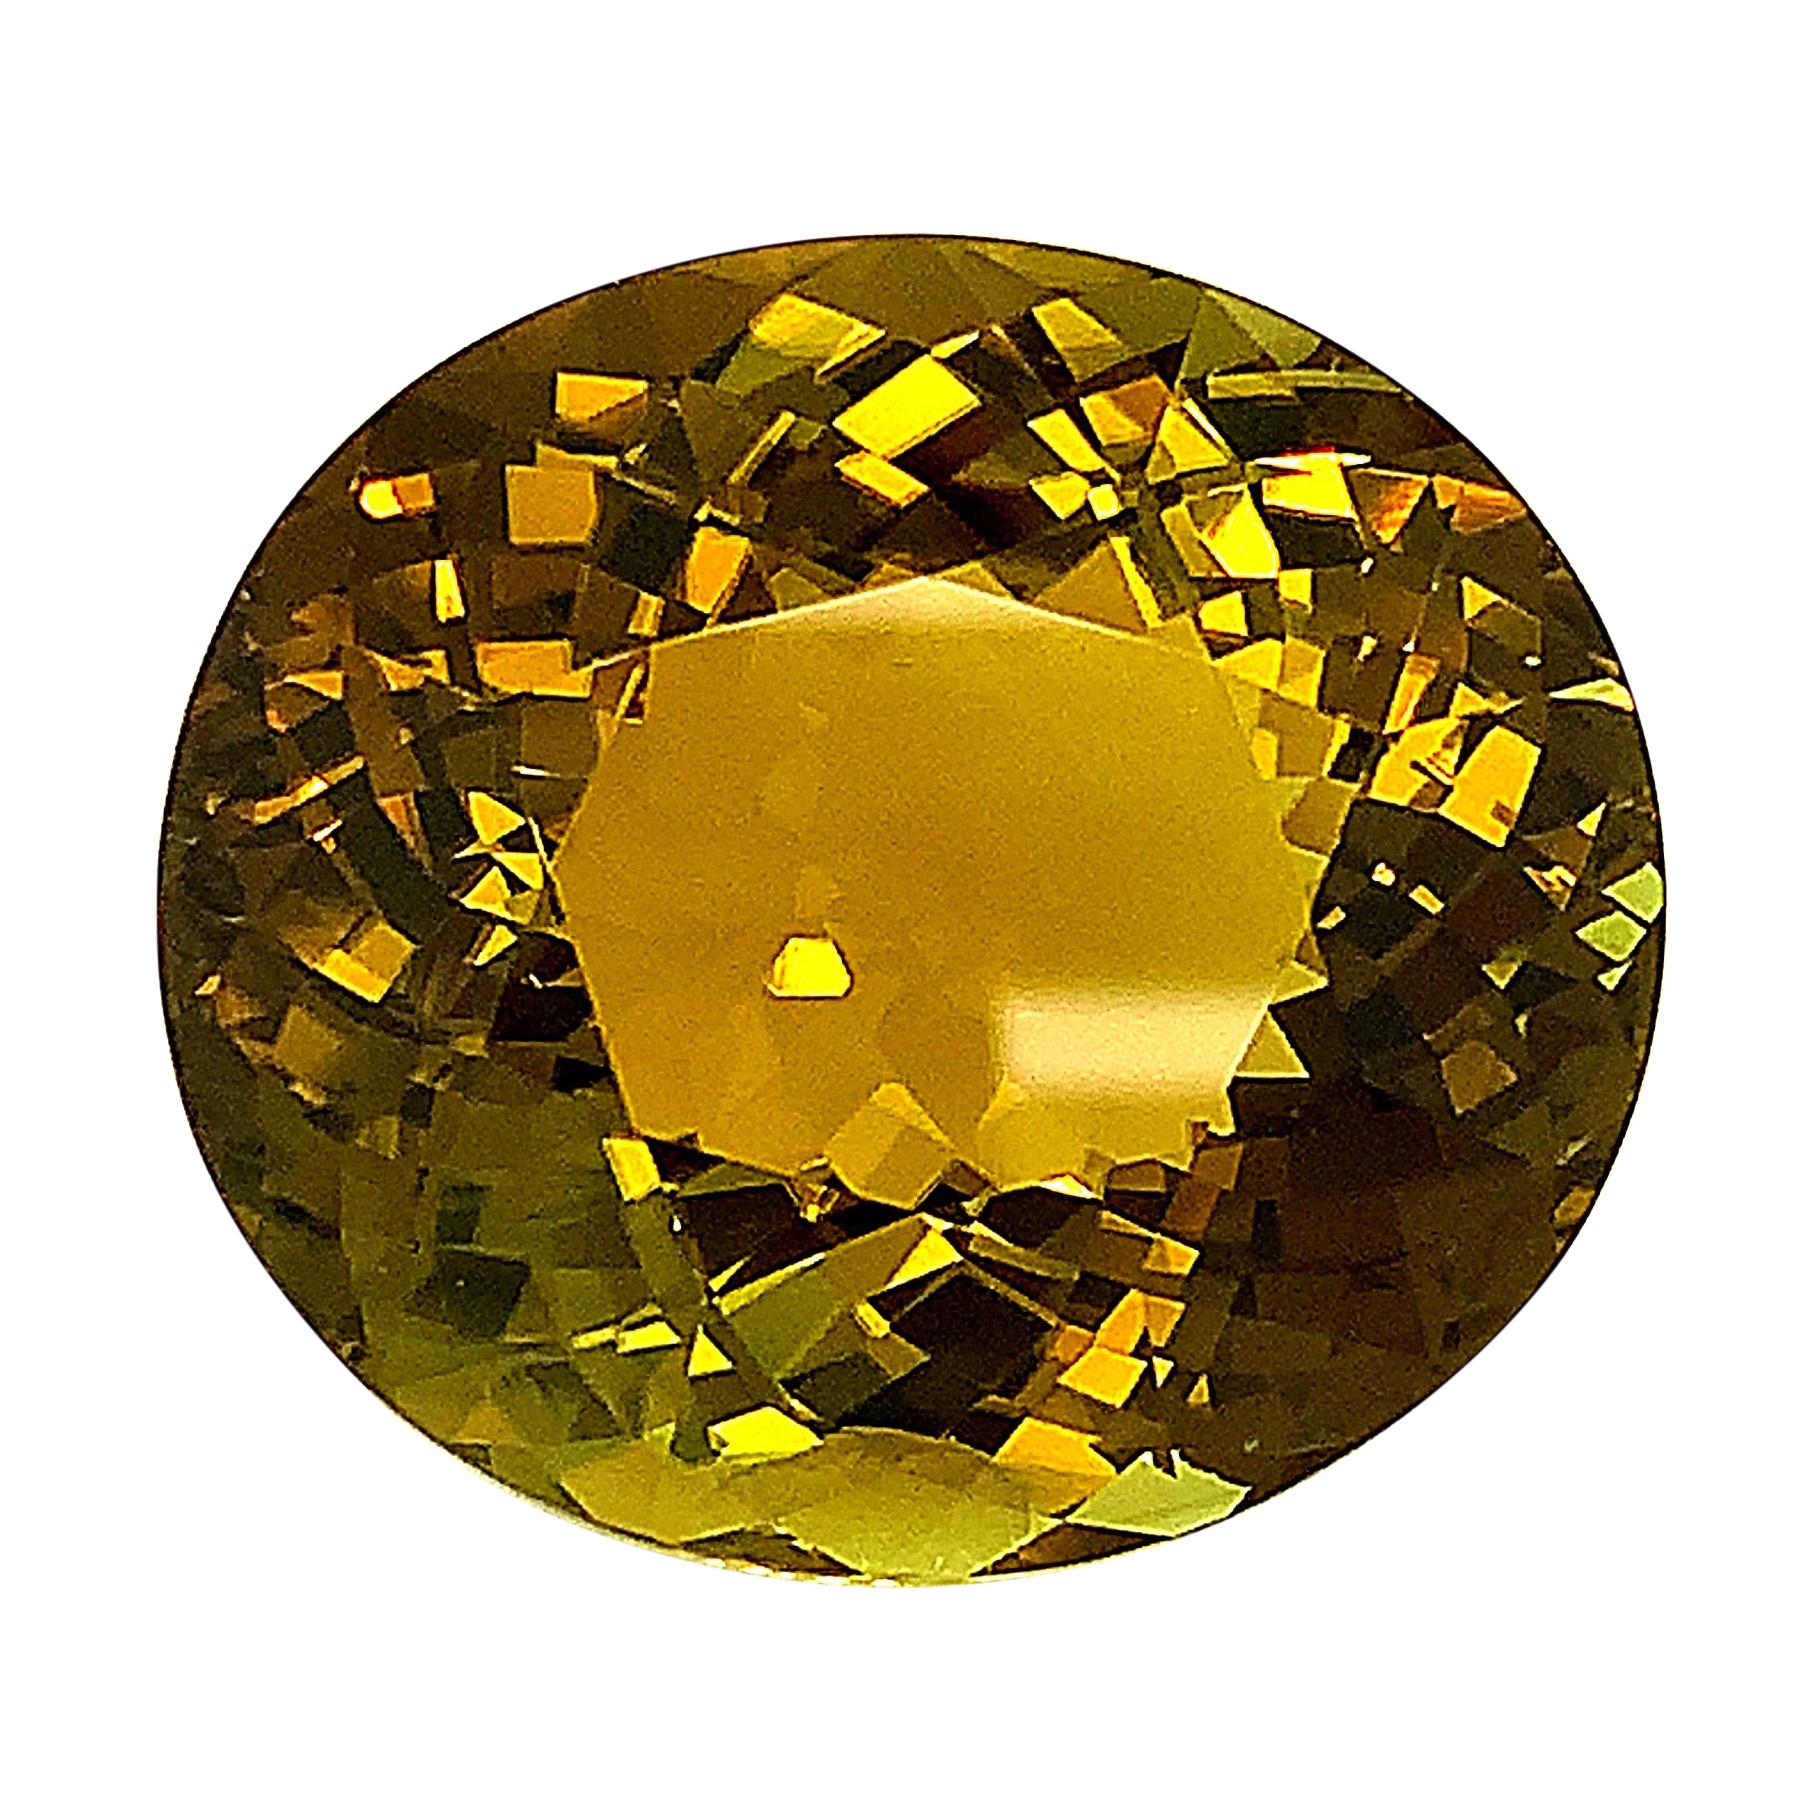  79.78 Carat Golden Olive Tourmaline Oval, Loose Gemstone, GIA Certified ...A For Sale